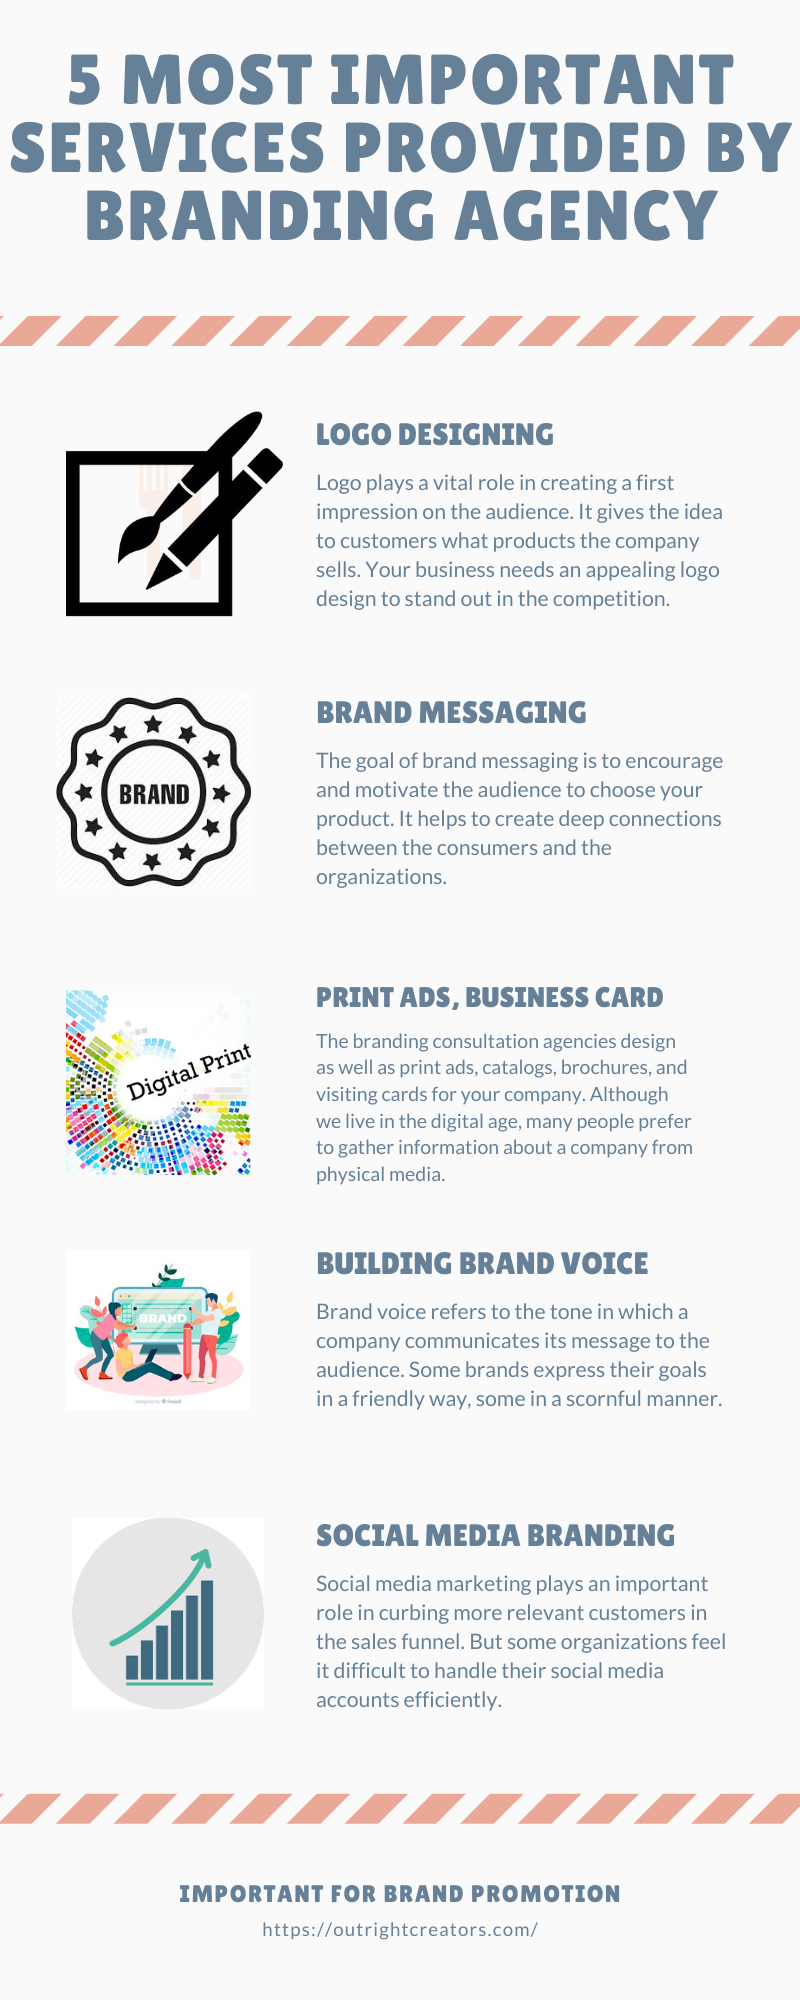 5 MOST IMPORTANT SERVICES PROVIDED BY BRANDING AGENCY